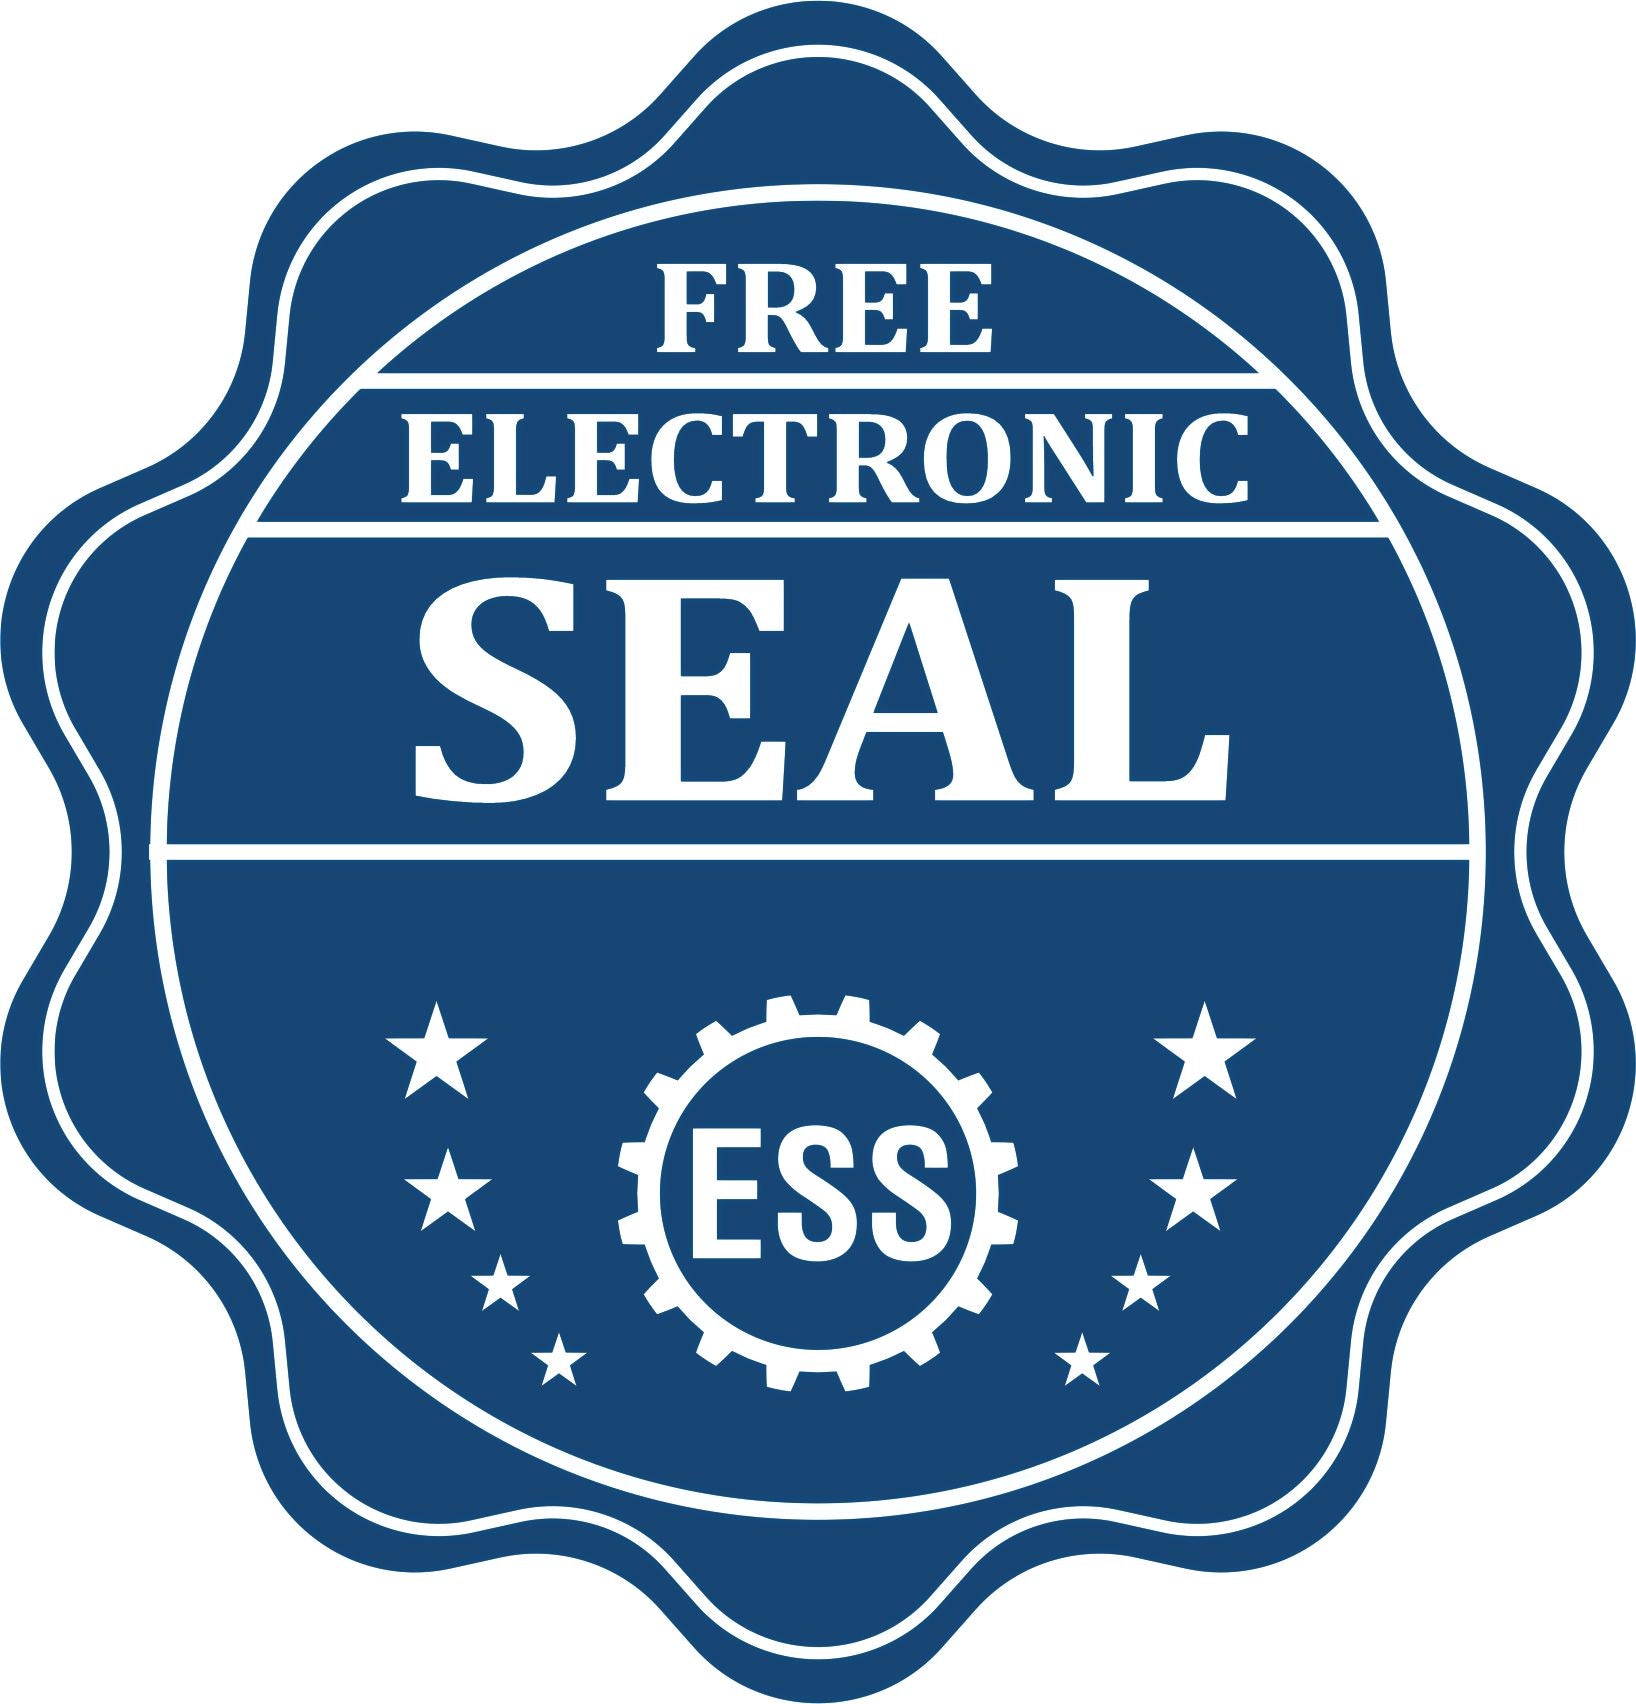 A badge showing a free electronic seal for the Premium MaxLight Pre-Inked North Dakota Engineering Stamp with stars and the ESS gear on the emblem.